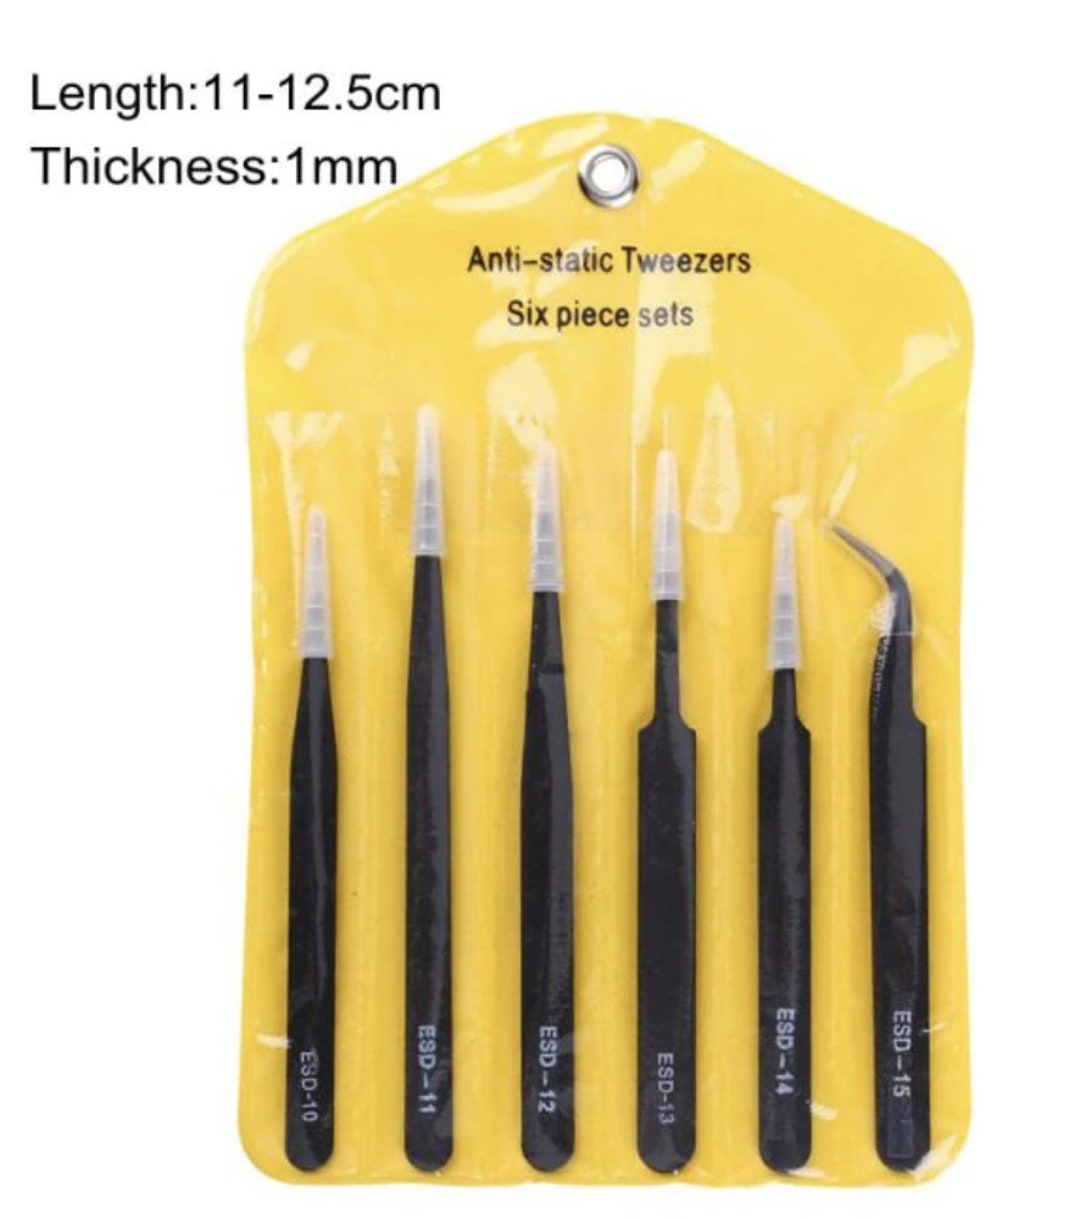 4pc Hobby Tweezer Set in Pouch, Length: 4-5/8 & 4-1-4, Stainless Steel 